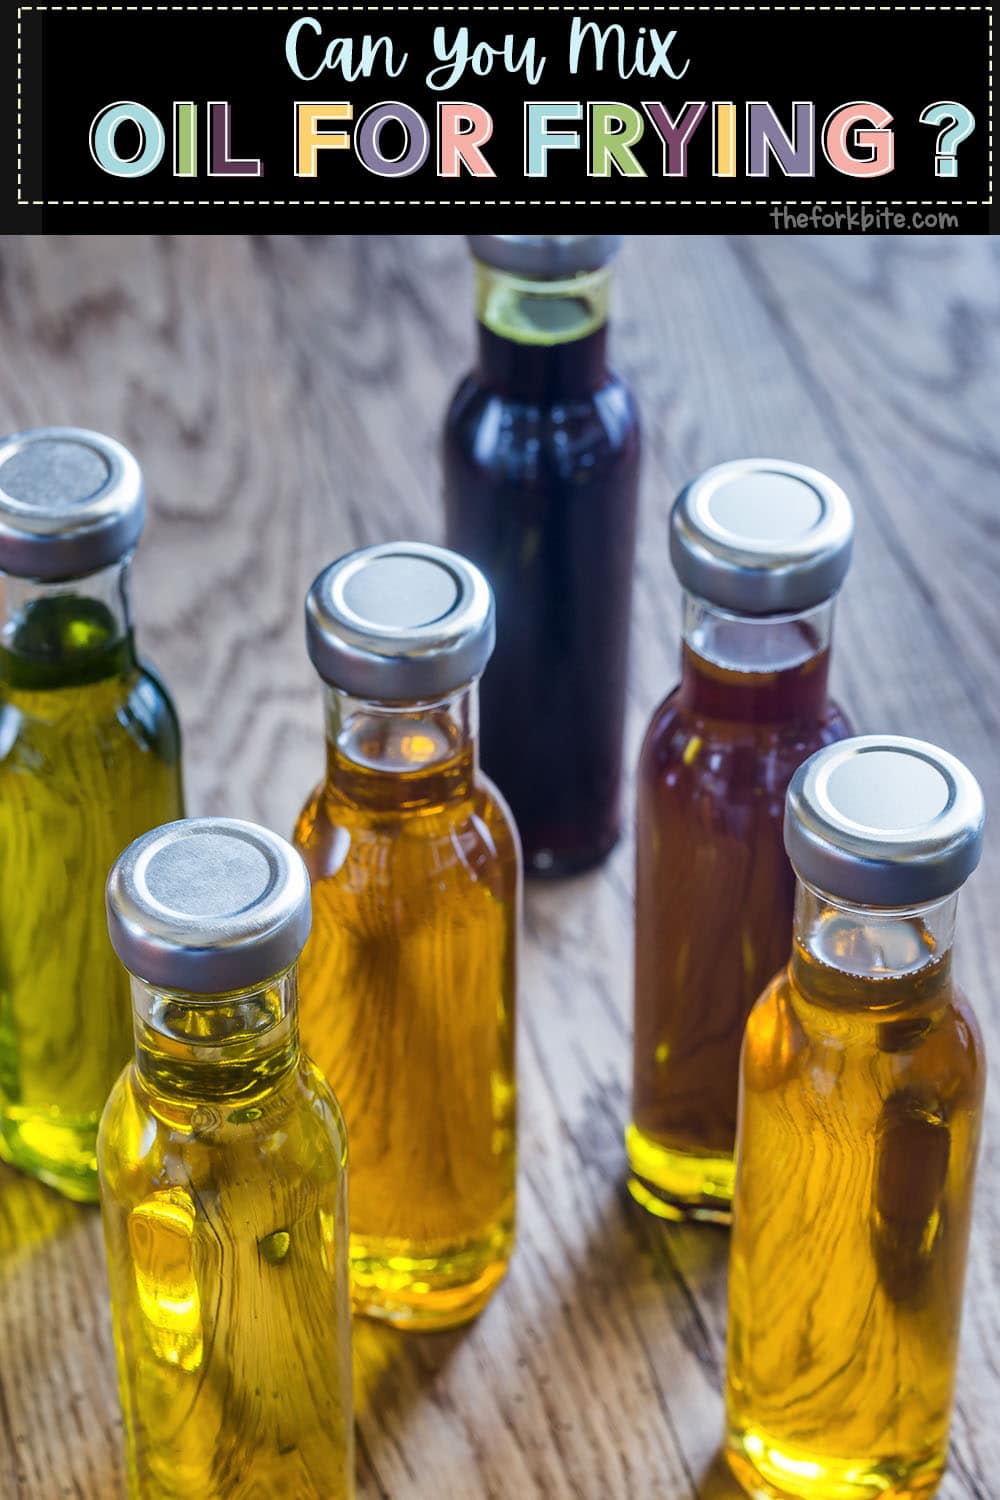 Depending on what it is you are cooking, the wrong blend of oils might adversely affect the dish’s flavor. Let me explain.